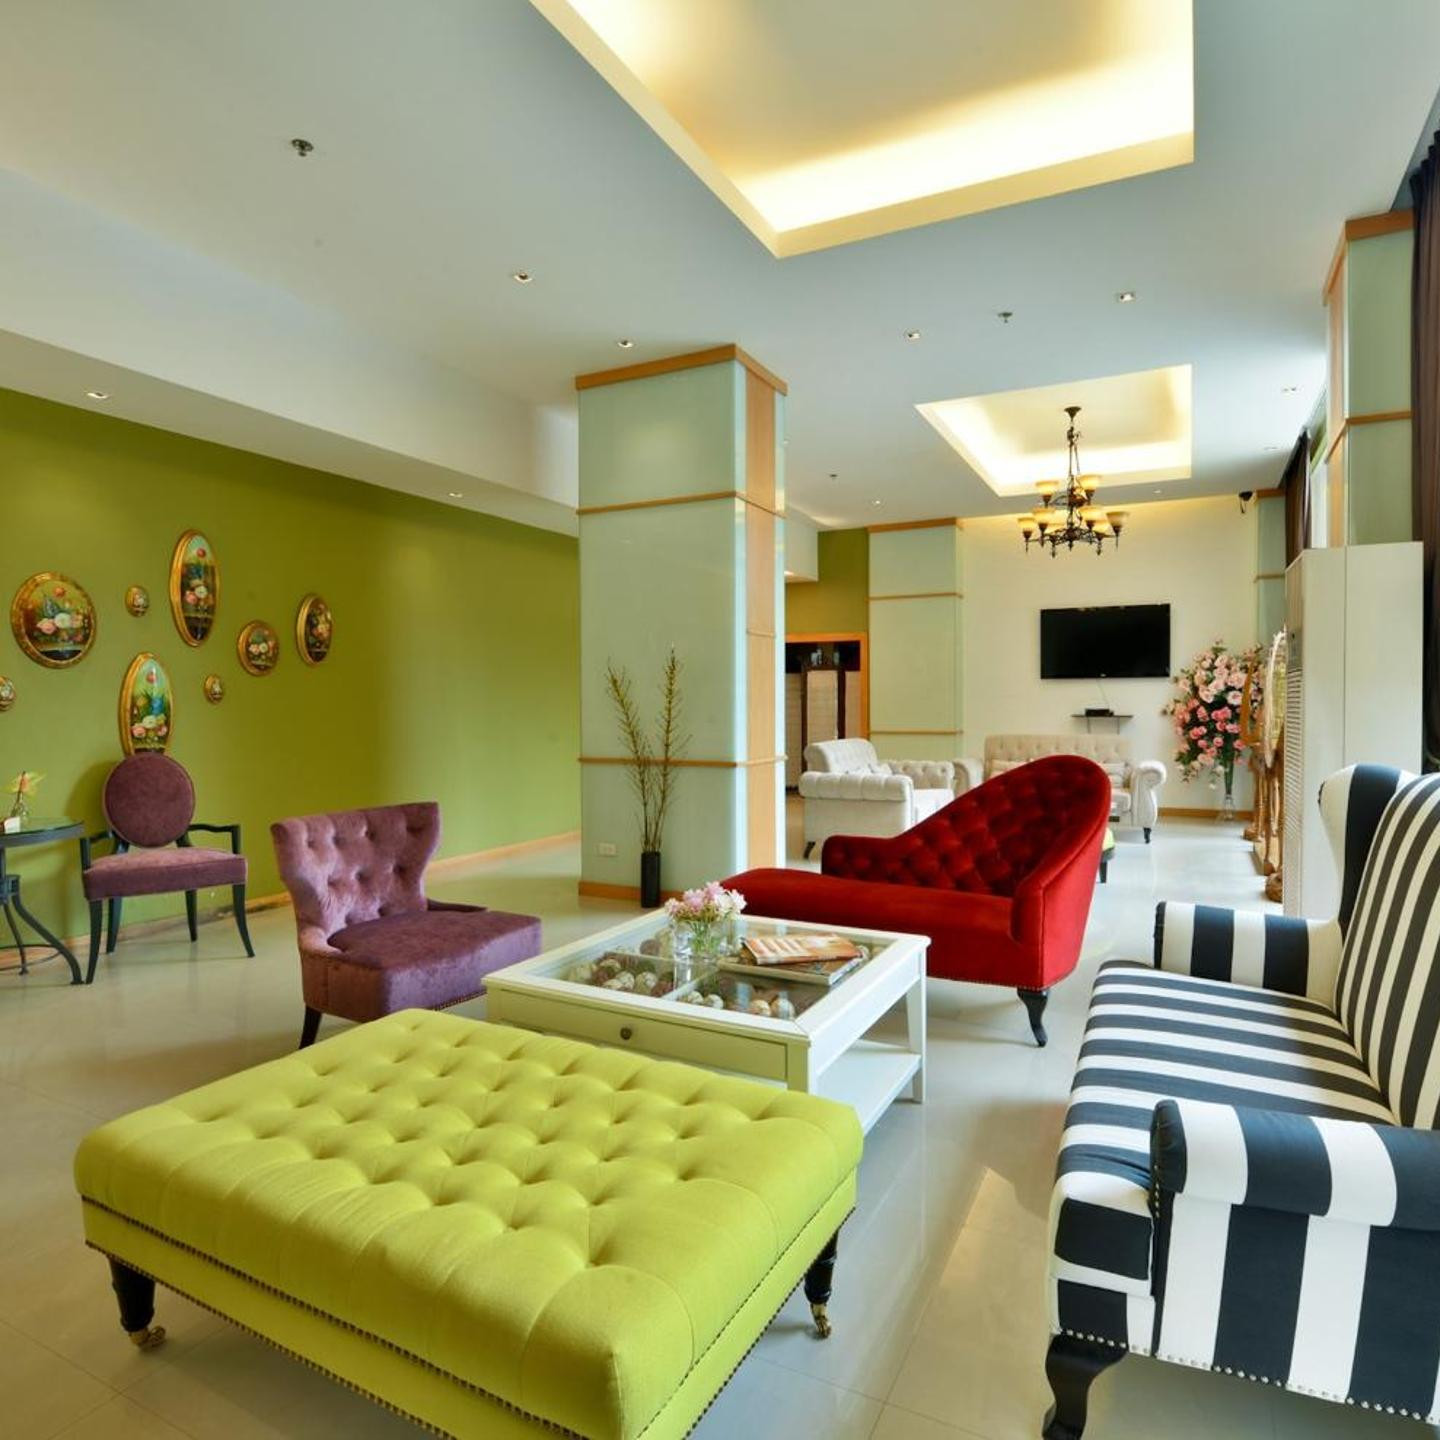 Abloom Exclusive Serviced Apartments